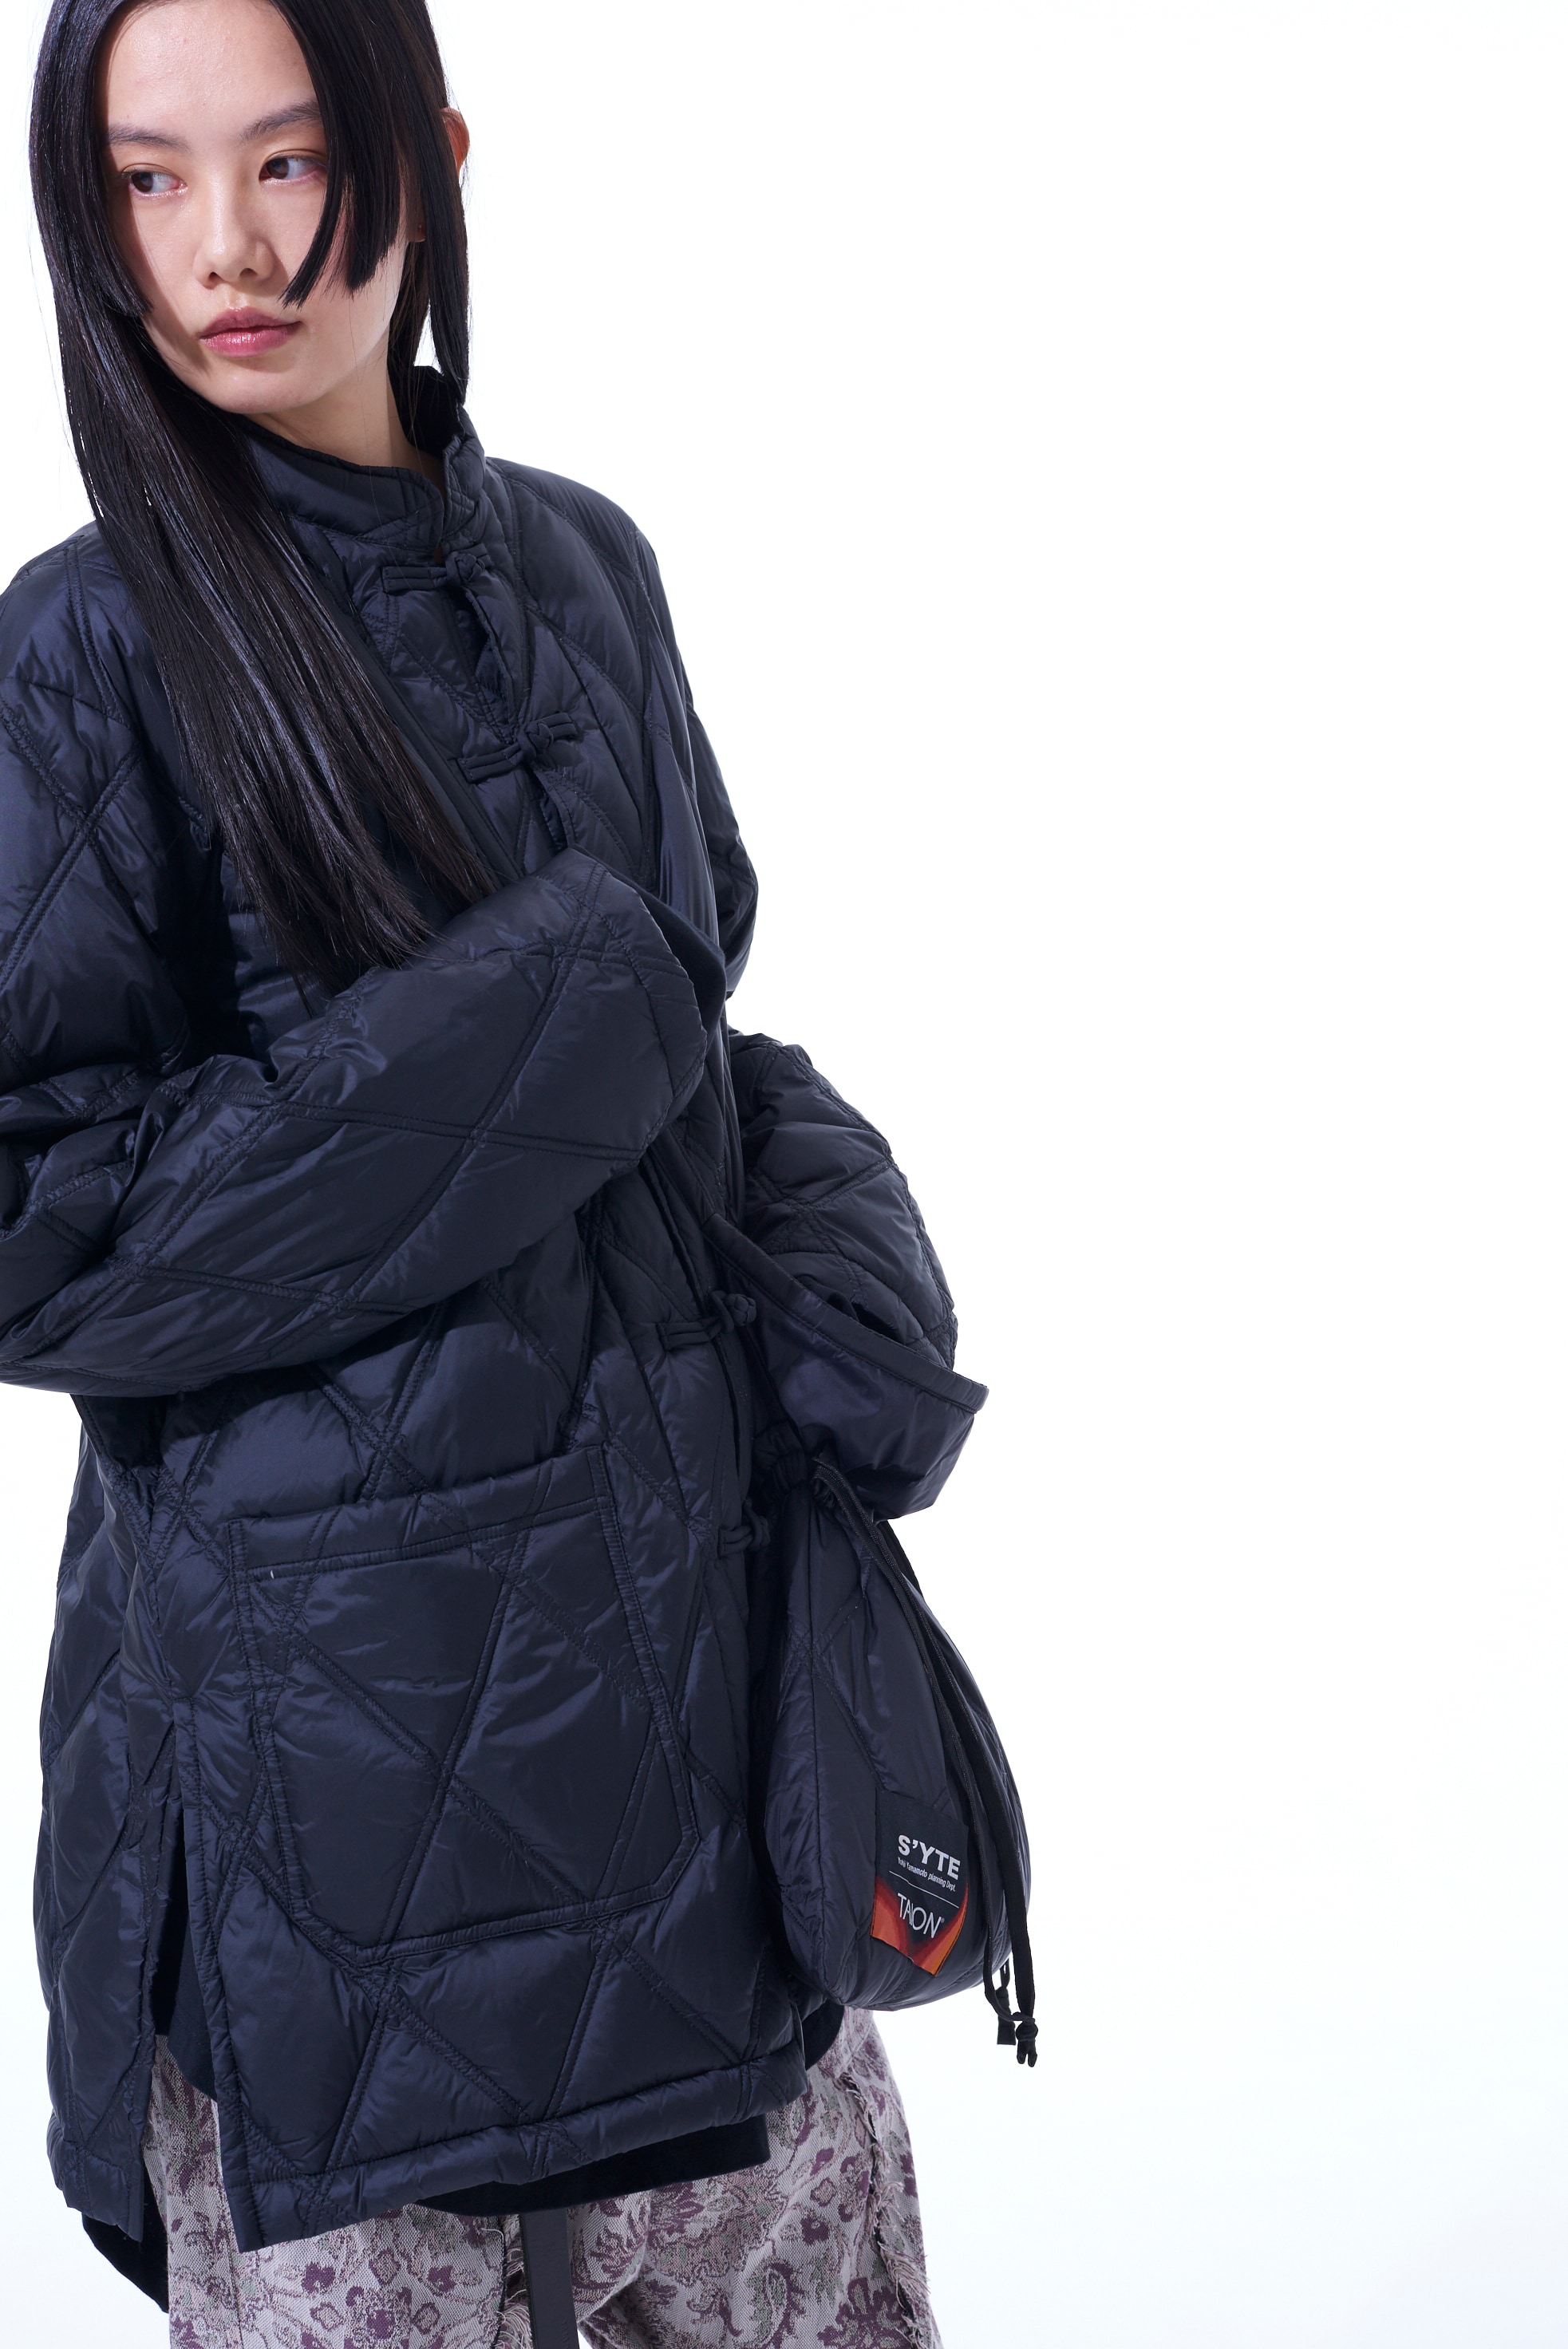 【S'YTE x TAION】Collaboration Collection QUILTED DOWN APRON BAG